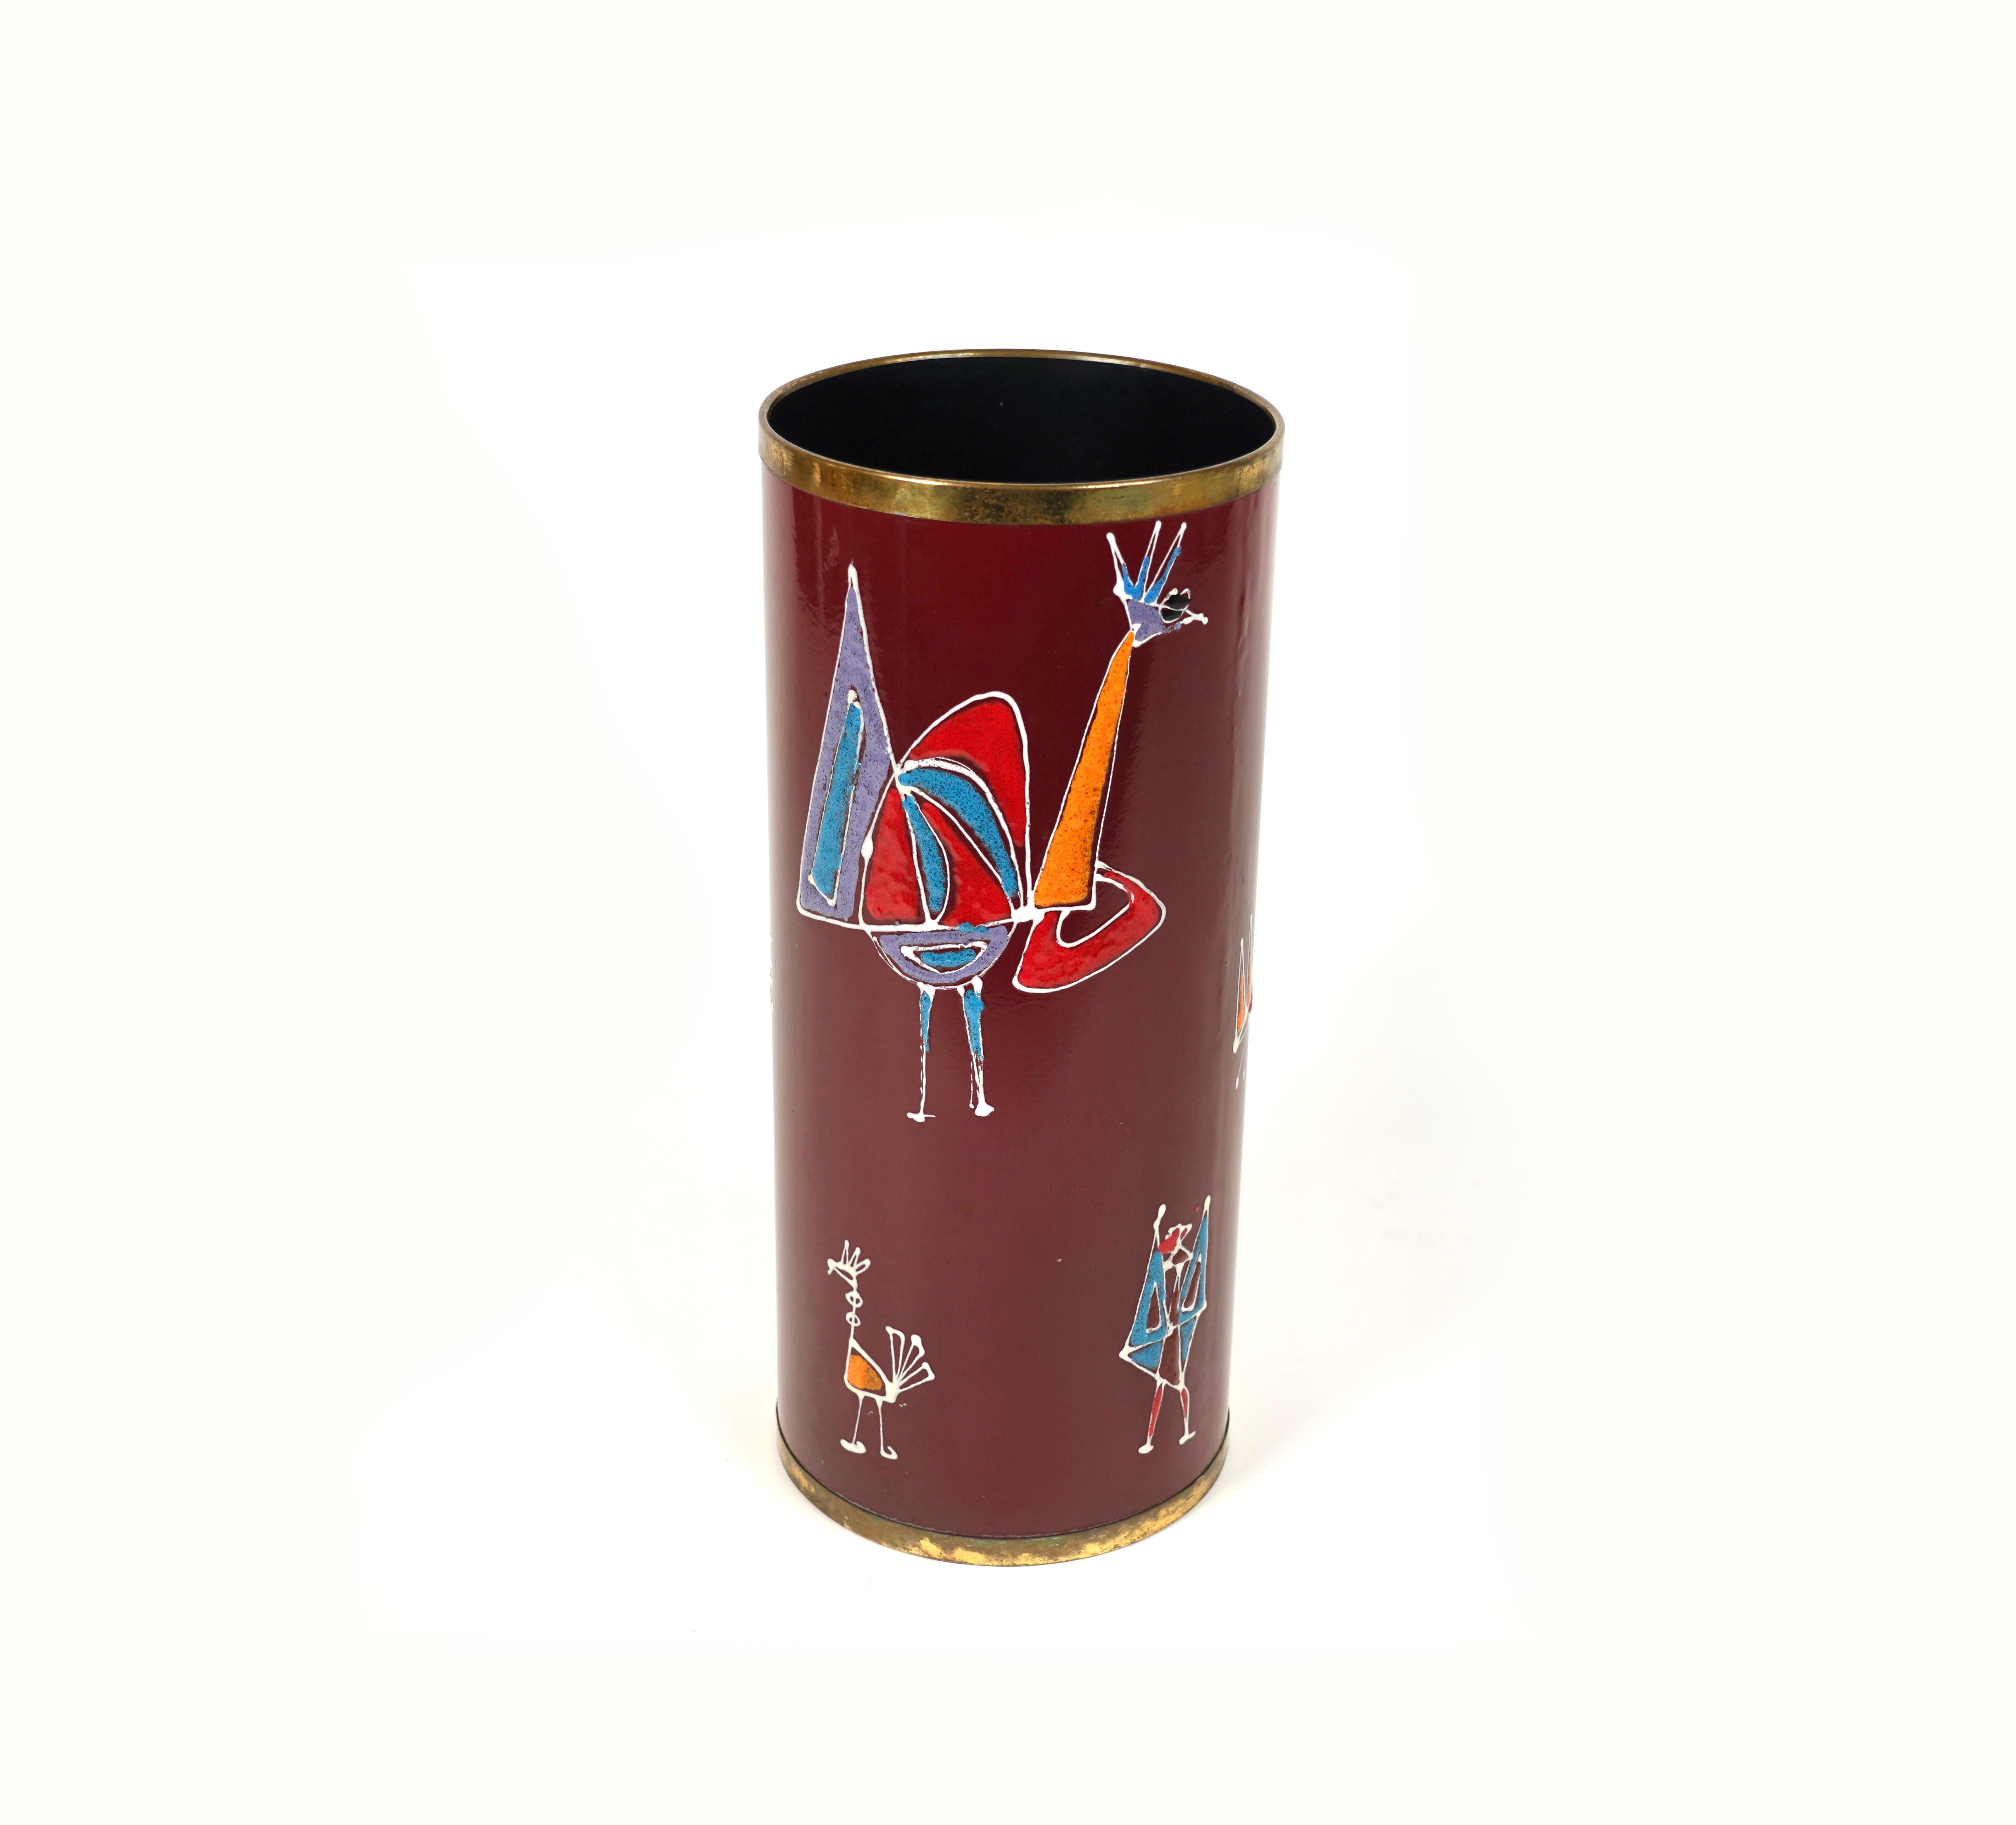 Midcentury umbrella stand in enamel iron and painted with brass details by S.I.V.A. di Poggibonsi.

Made in Italy in the 1960s.

S.I.V.A., a factory of artistic enamels on steel, was founded in 1953 by the painter and sculptor Giuseppe Calonaci,